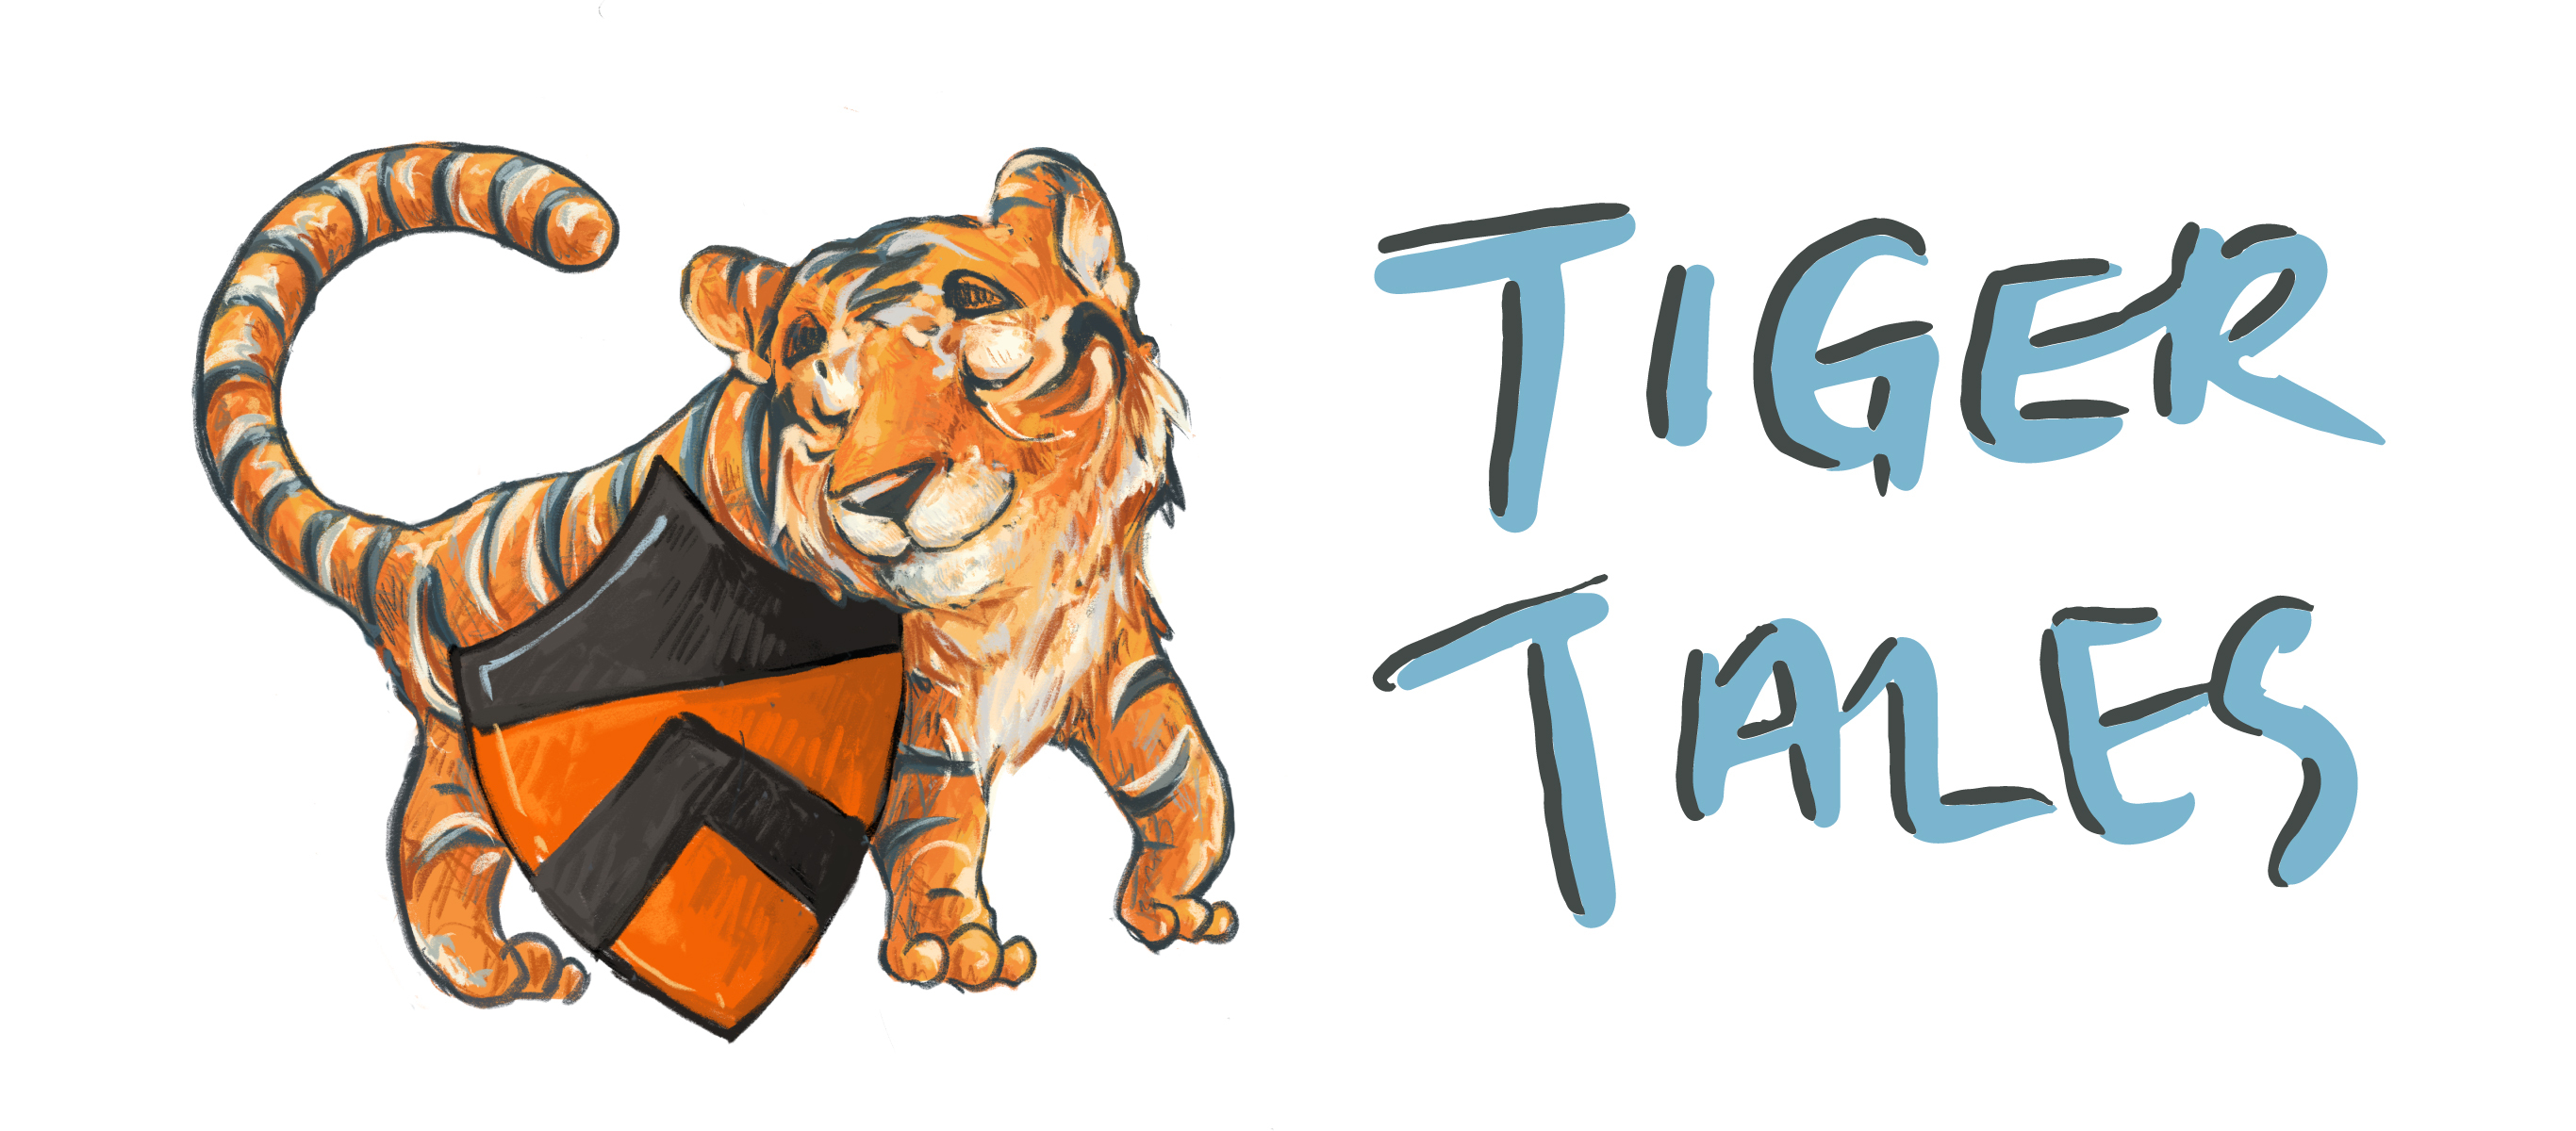 Tiger Tales Blog Name and Tiger with Shield